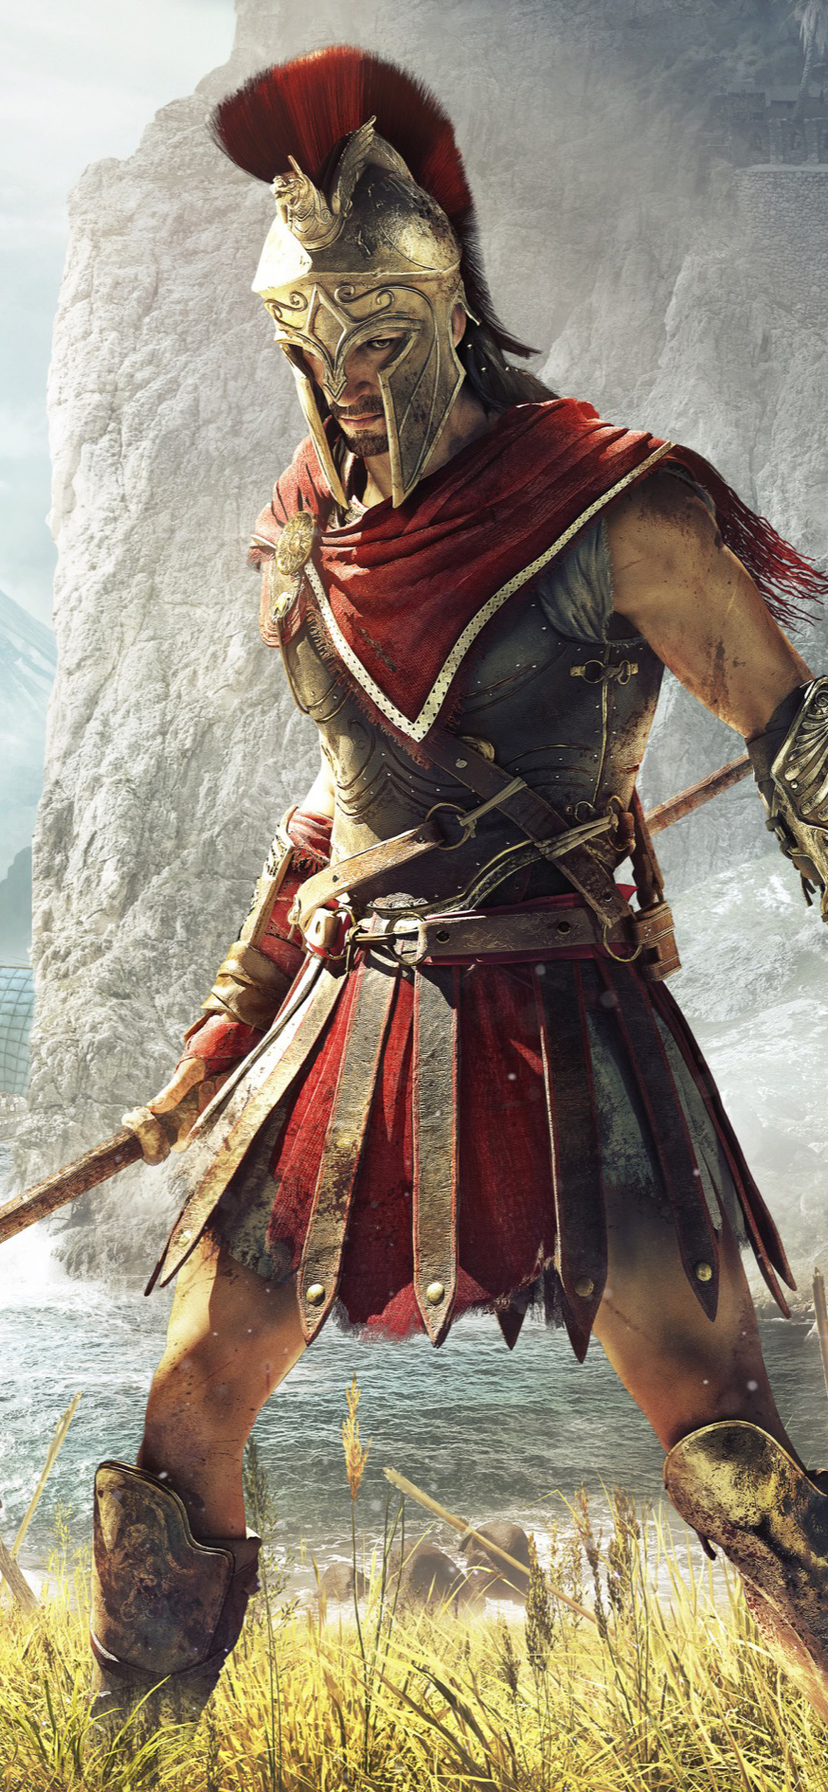 Assassin's Creed Odyssey Wallpapers